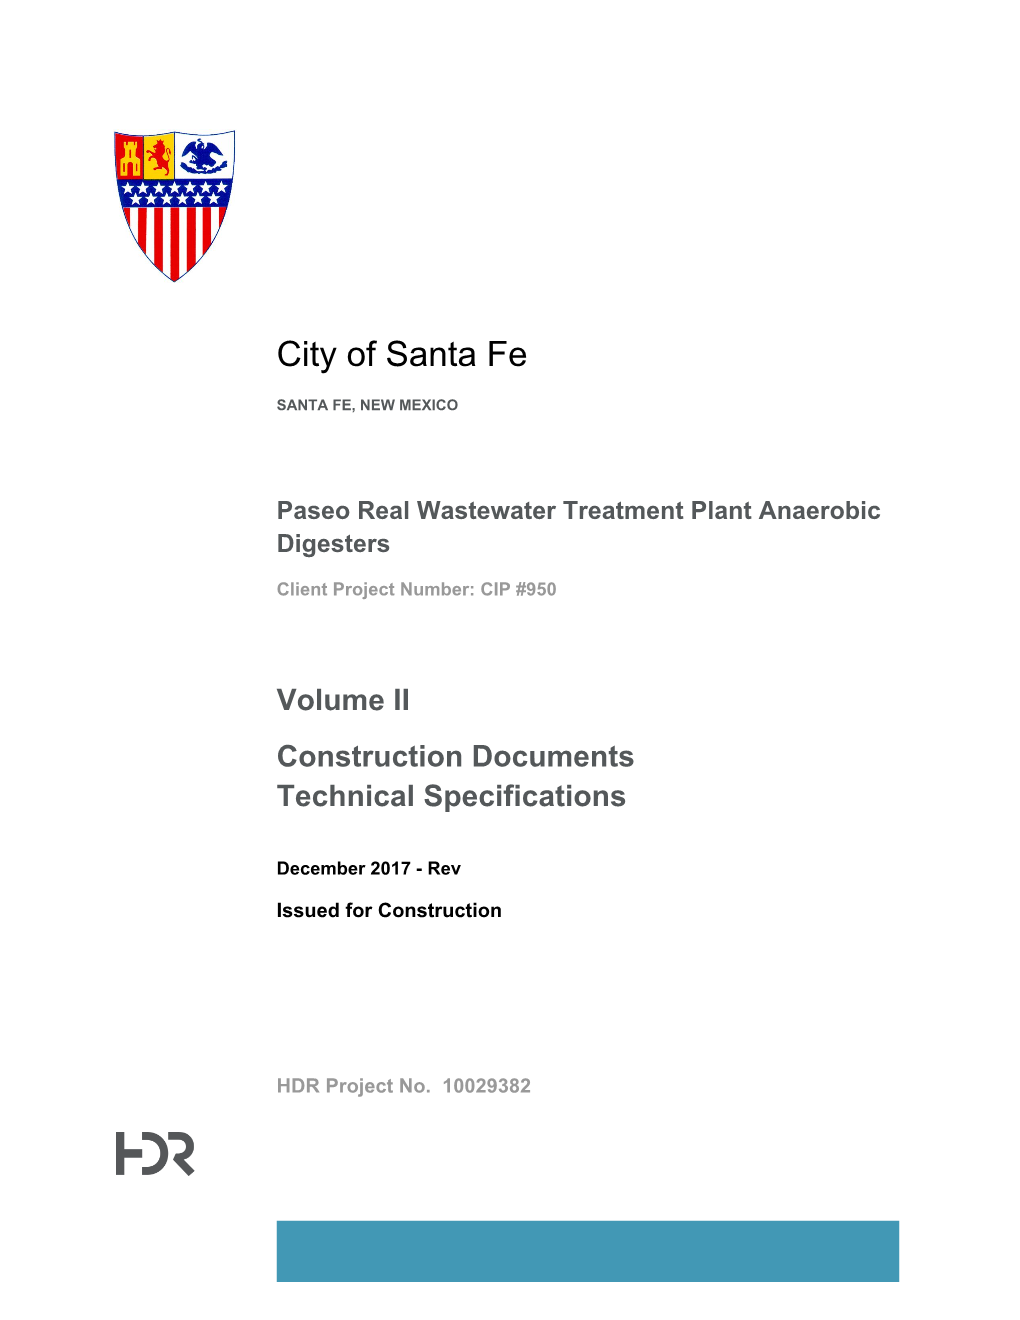 Volume II Construction Documents Technical Specifications